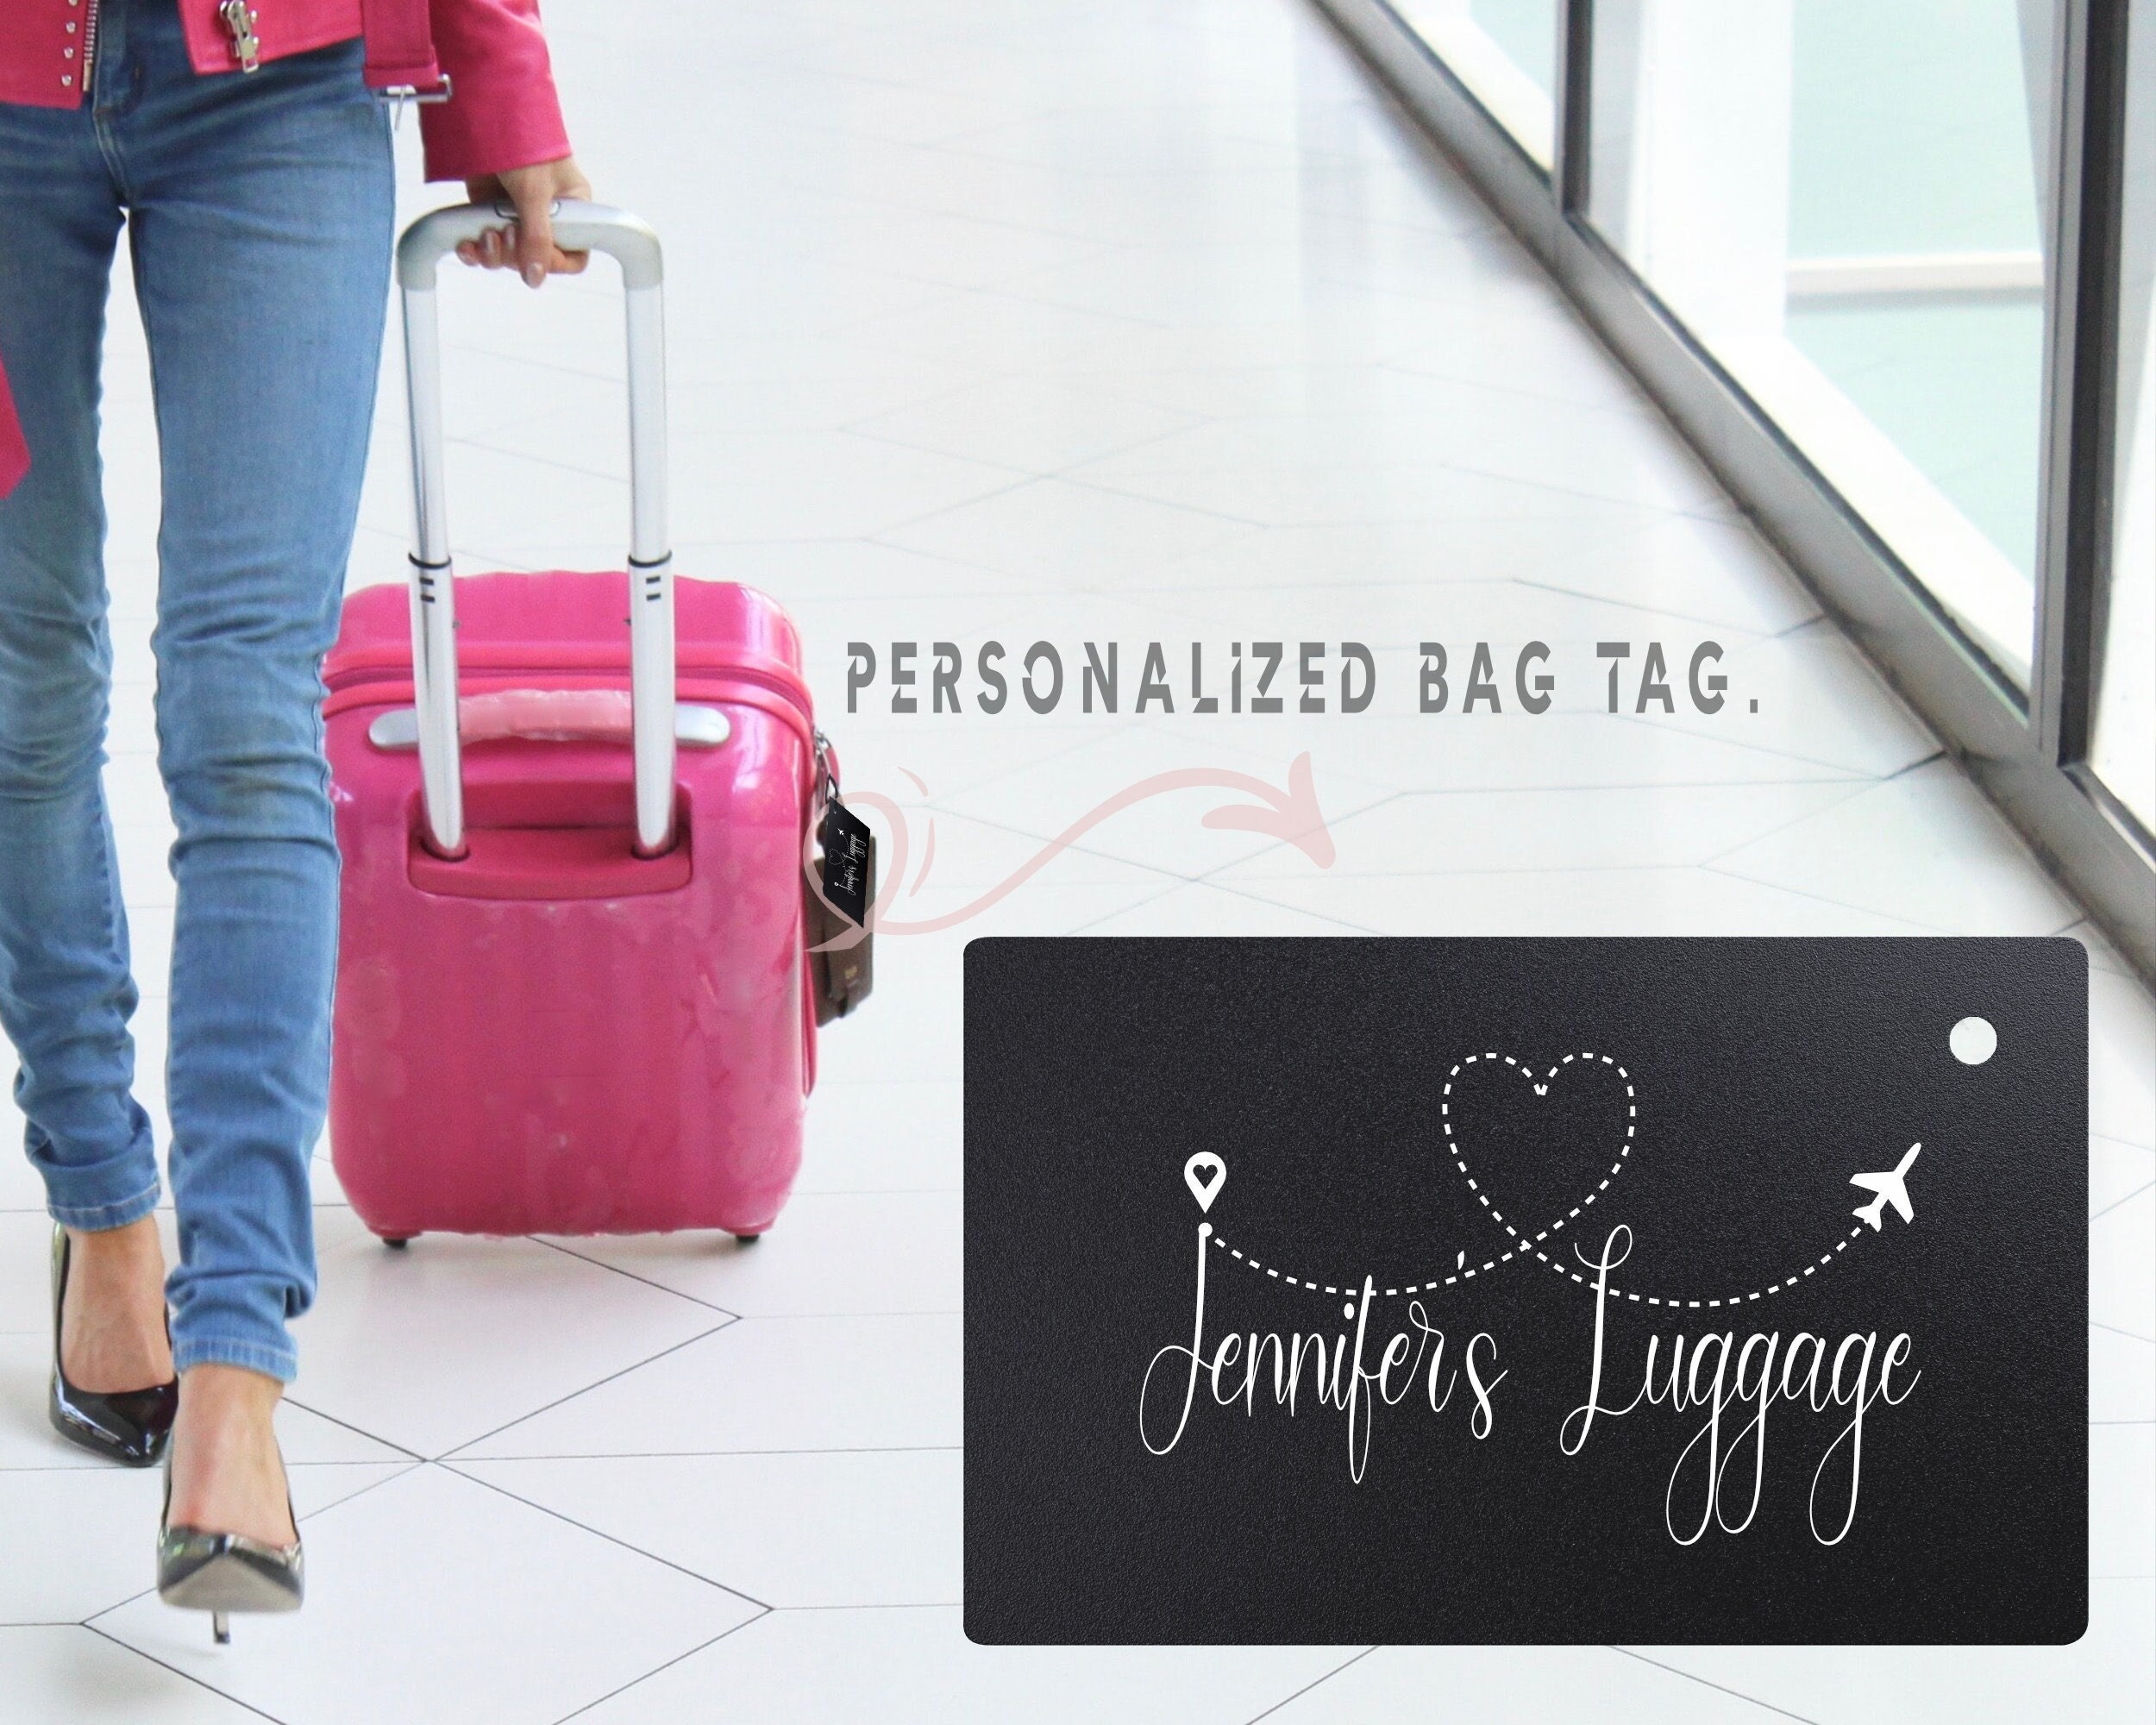 Customized Luggage Tags Travel Bag Labels Suitcase Tags Travel